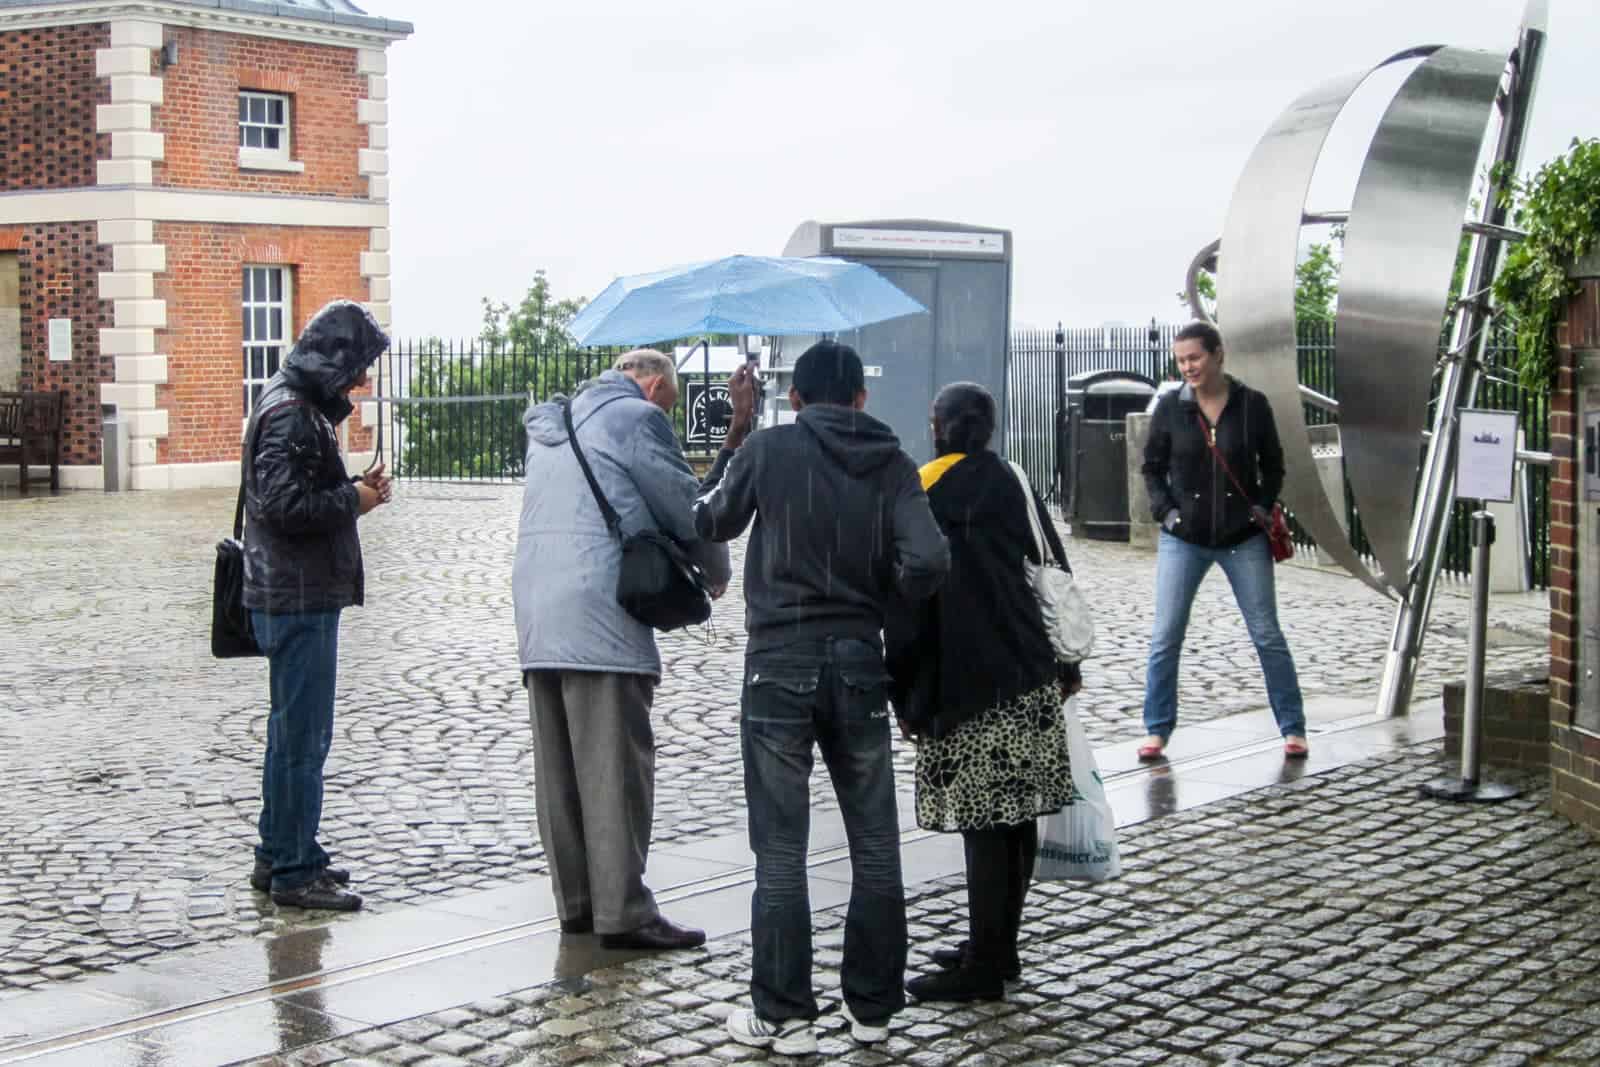 A group of five people standing next to Greenwich Prime Meridian Line in London on a visit